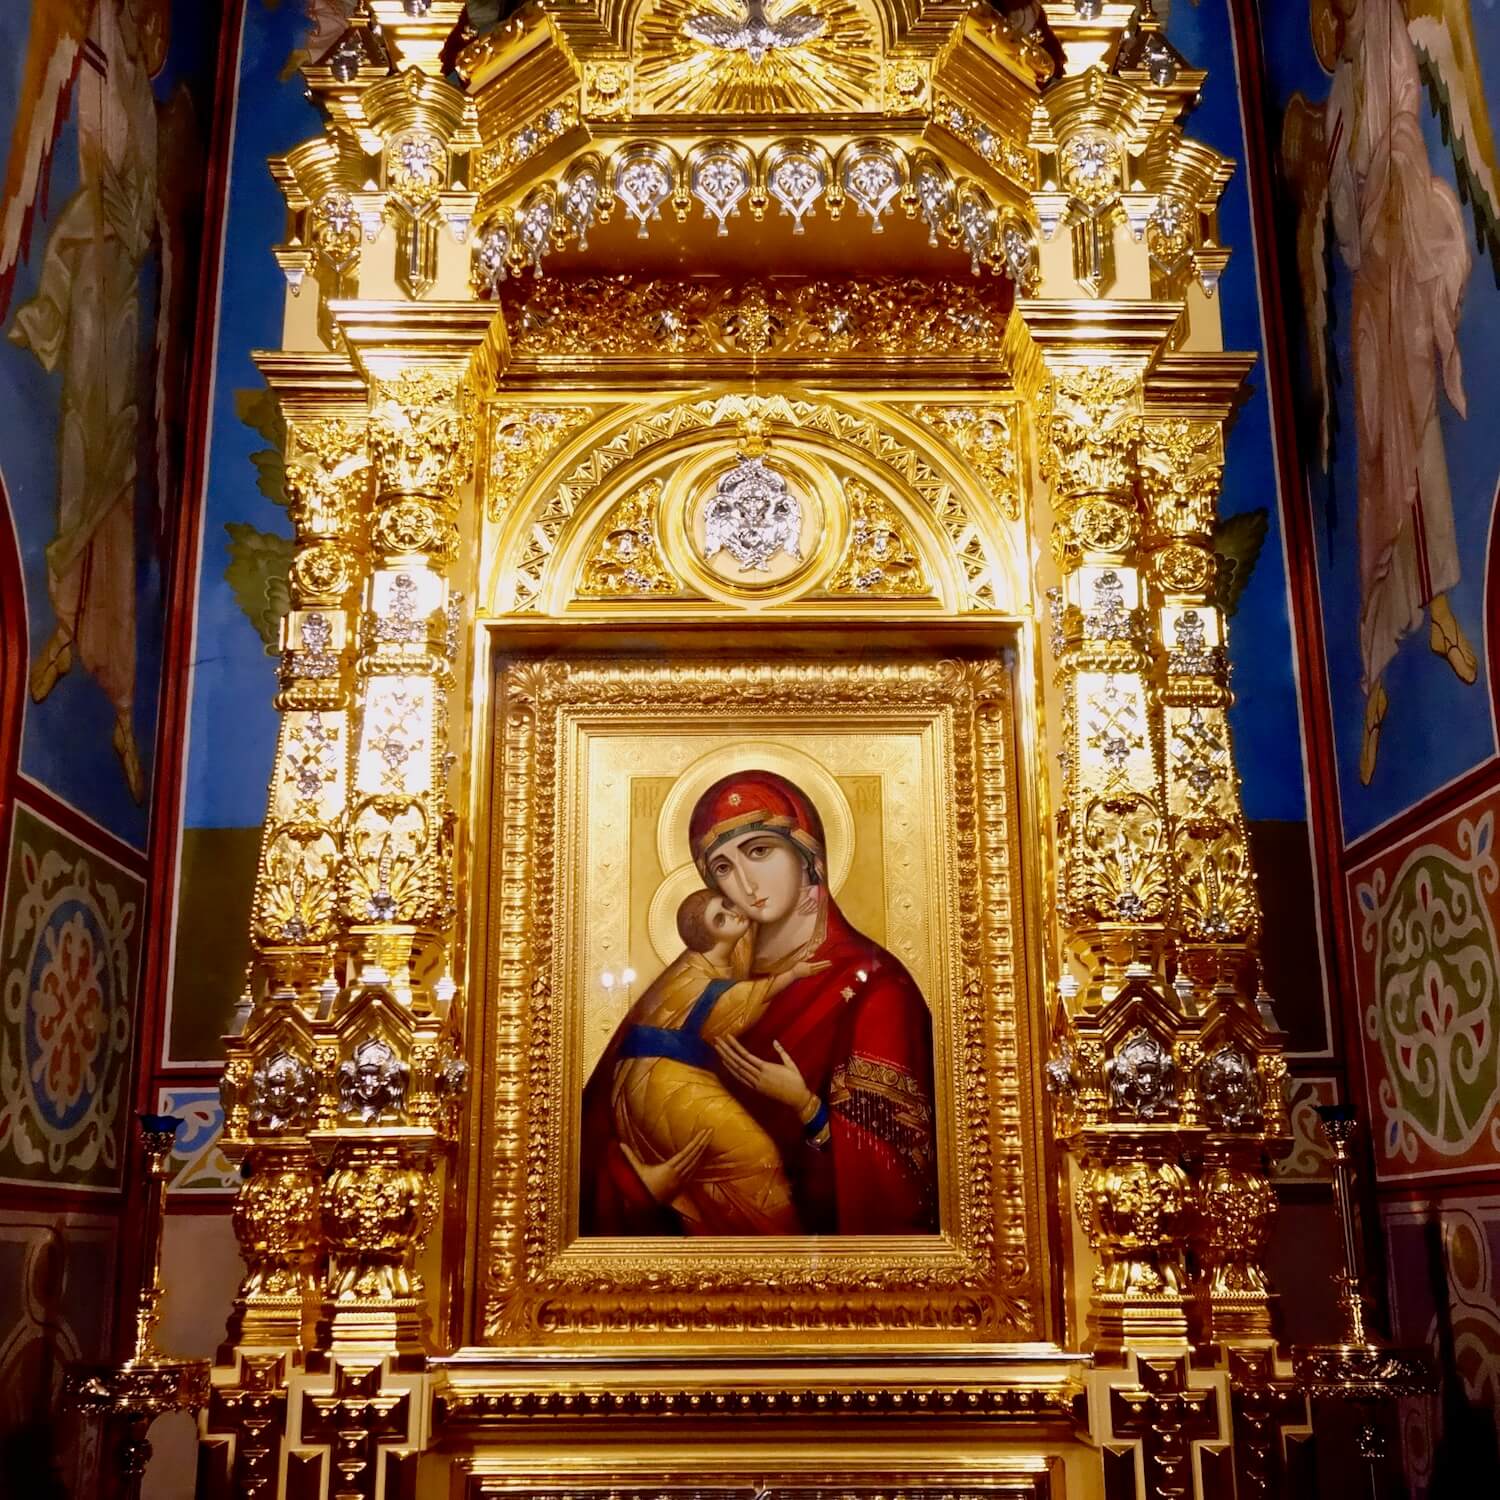 Mary Icon located inside the vestibule of the main church in St. Michael's Golden Dome Monastery.